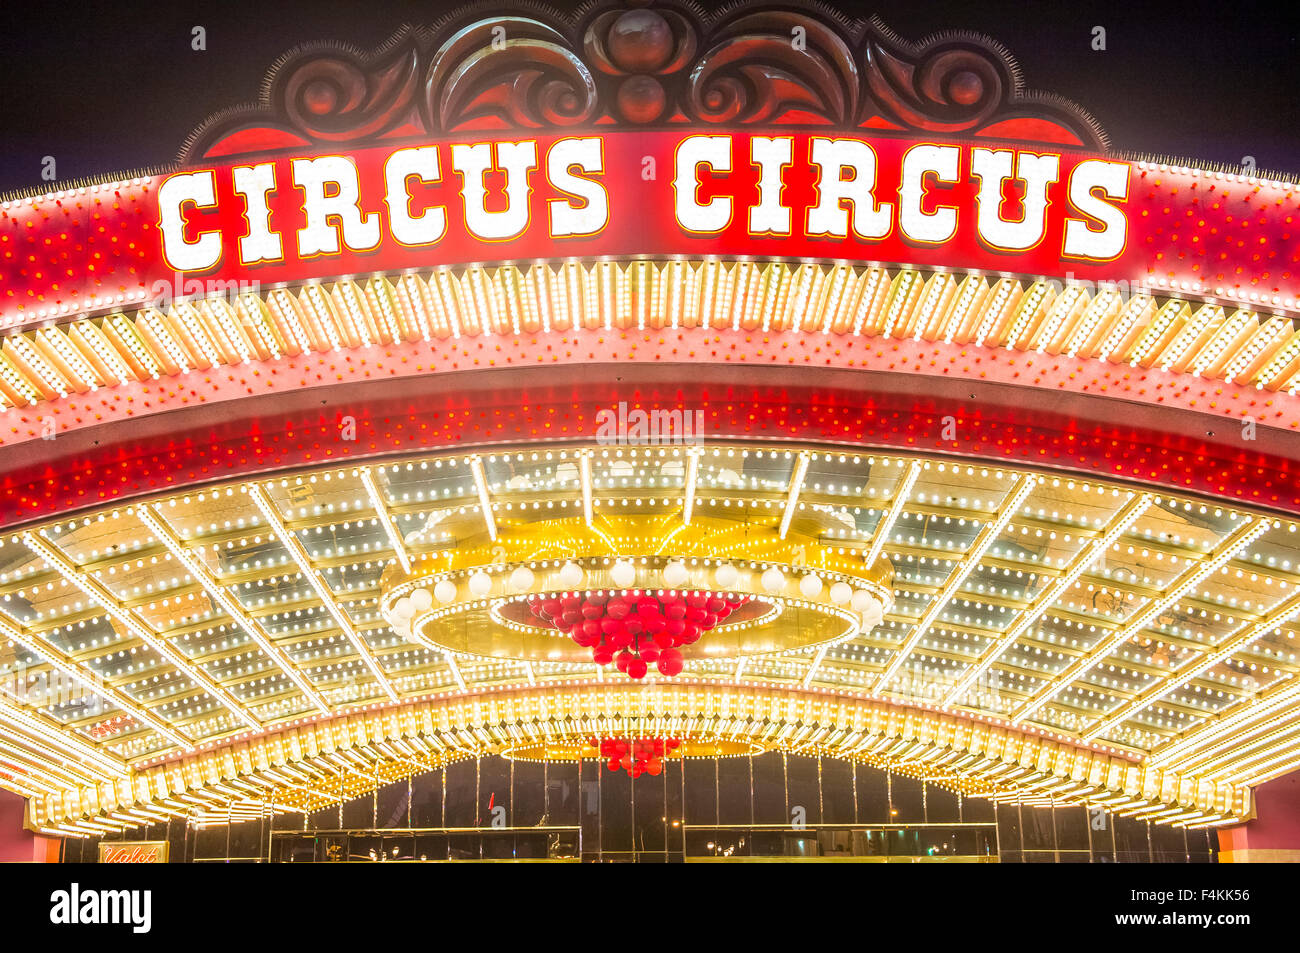 The Circus Circus hotel and casino sign in Las Vegas Stock Photo